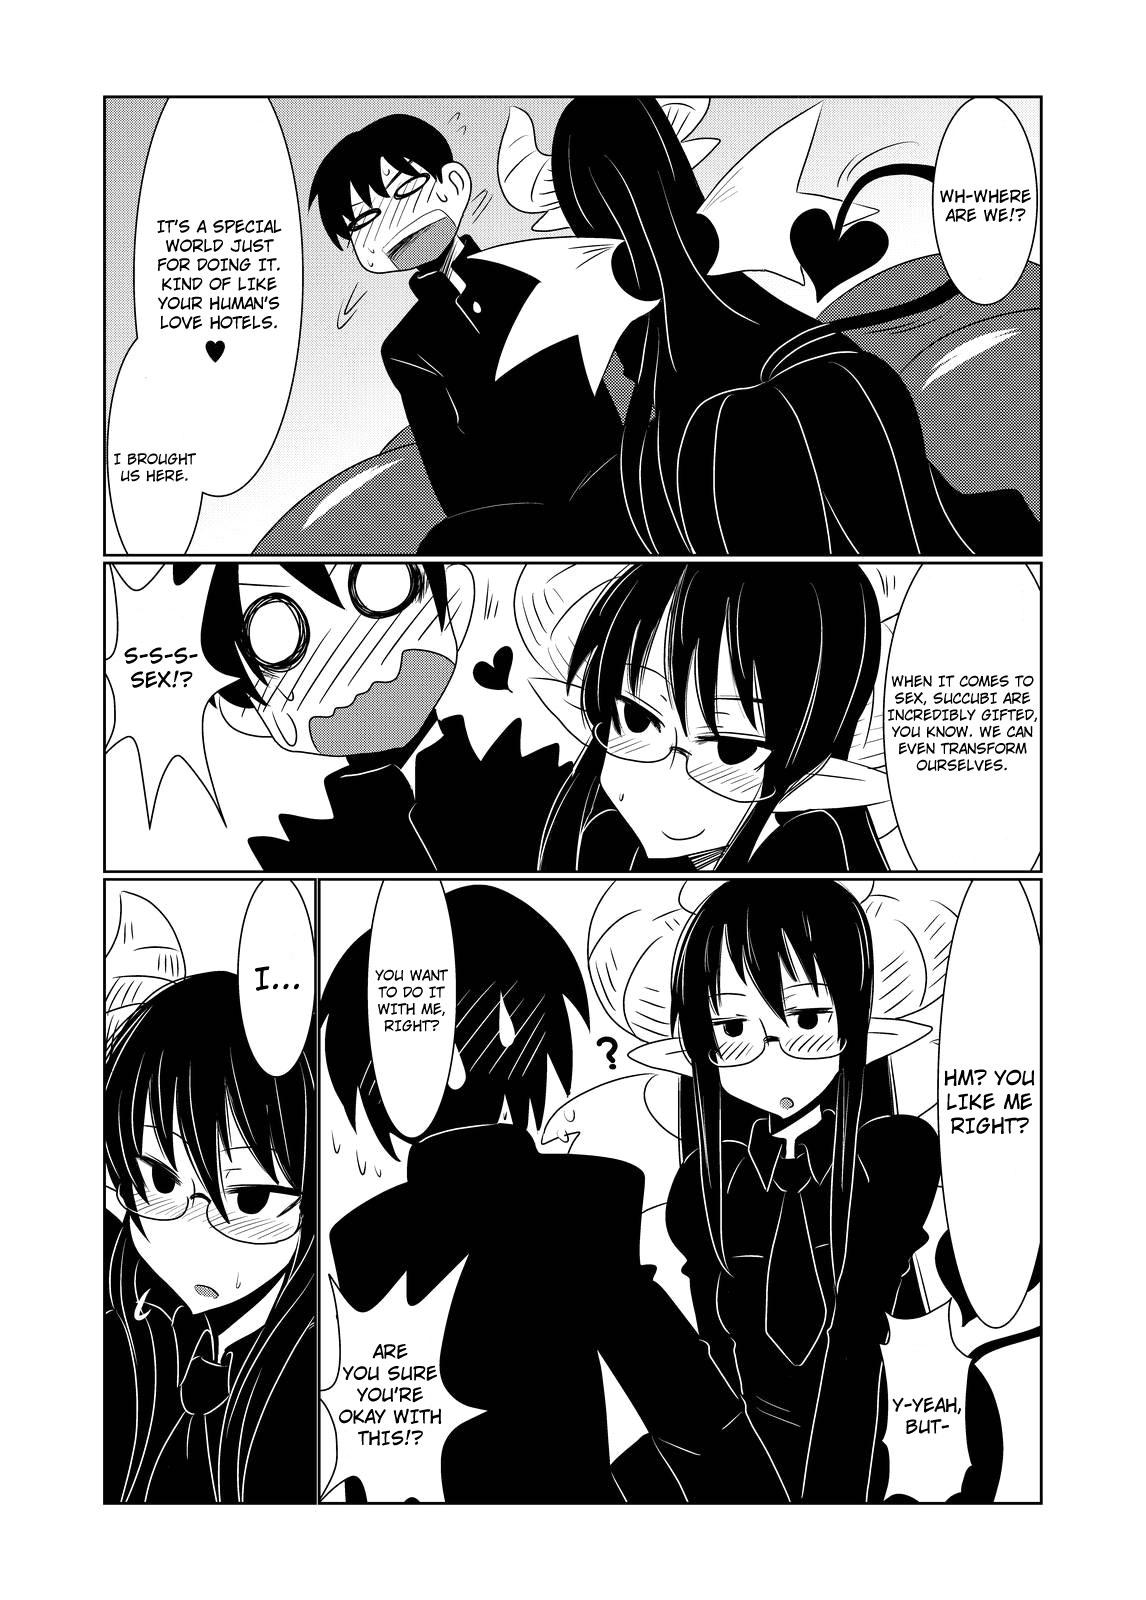 Blowjob Contest JK Succubus no Renai Jijou. | Thoughts on Love by a Female High School Succubus Exhibitionist - Page 8